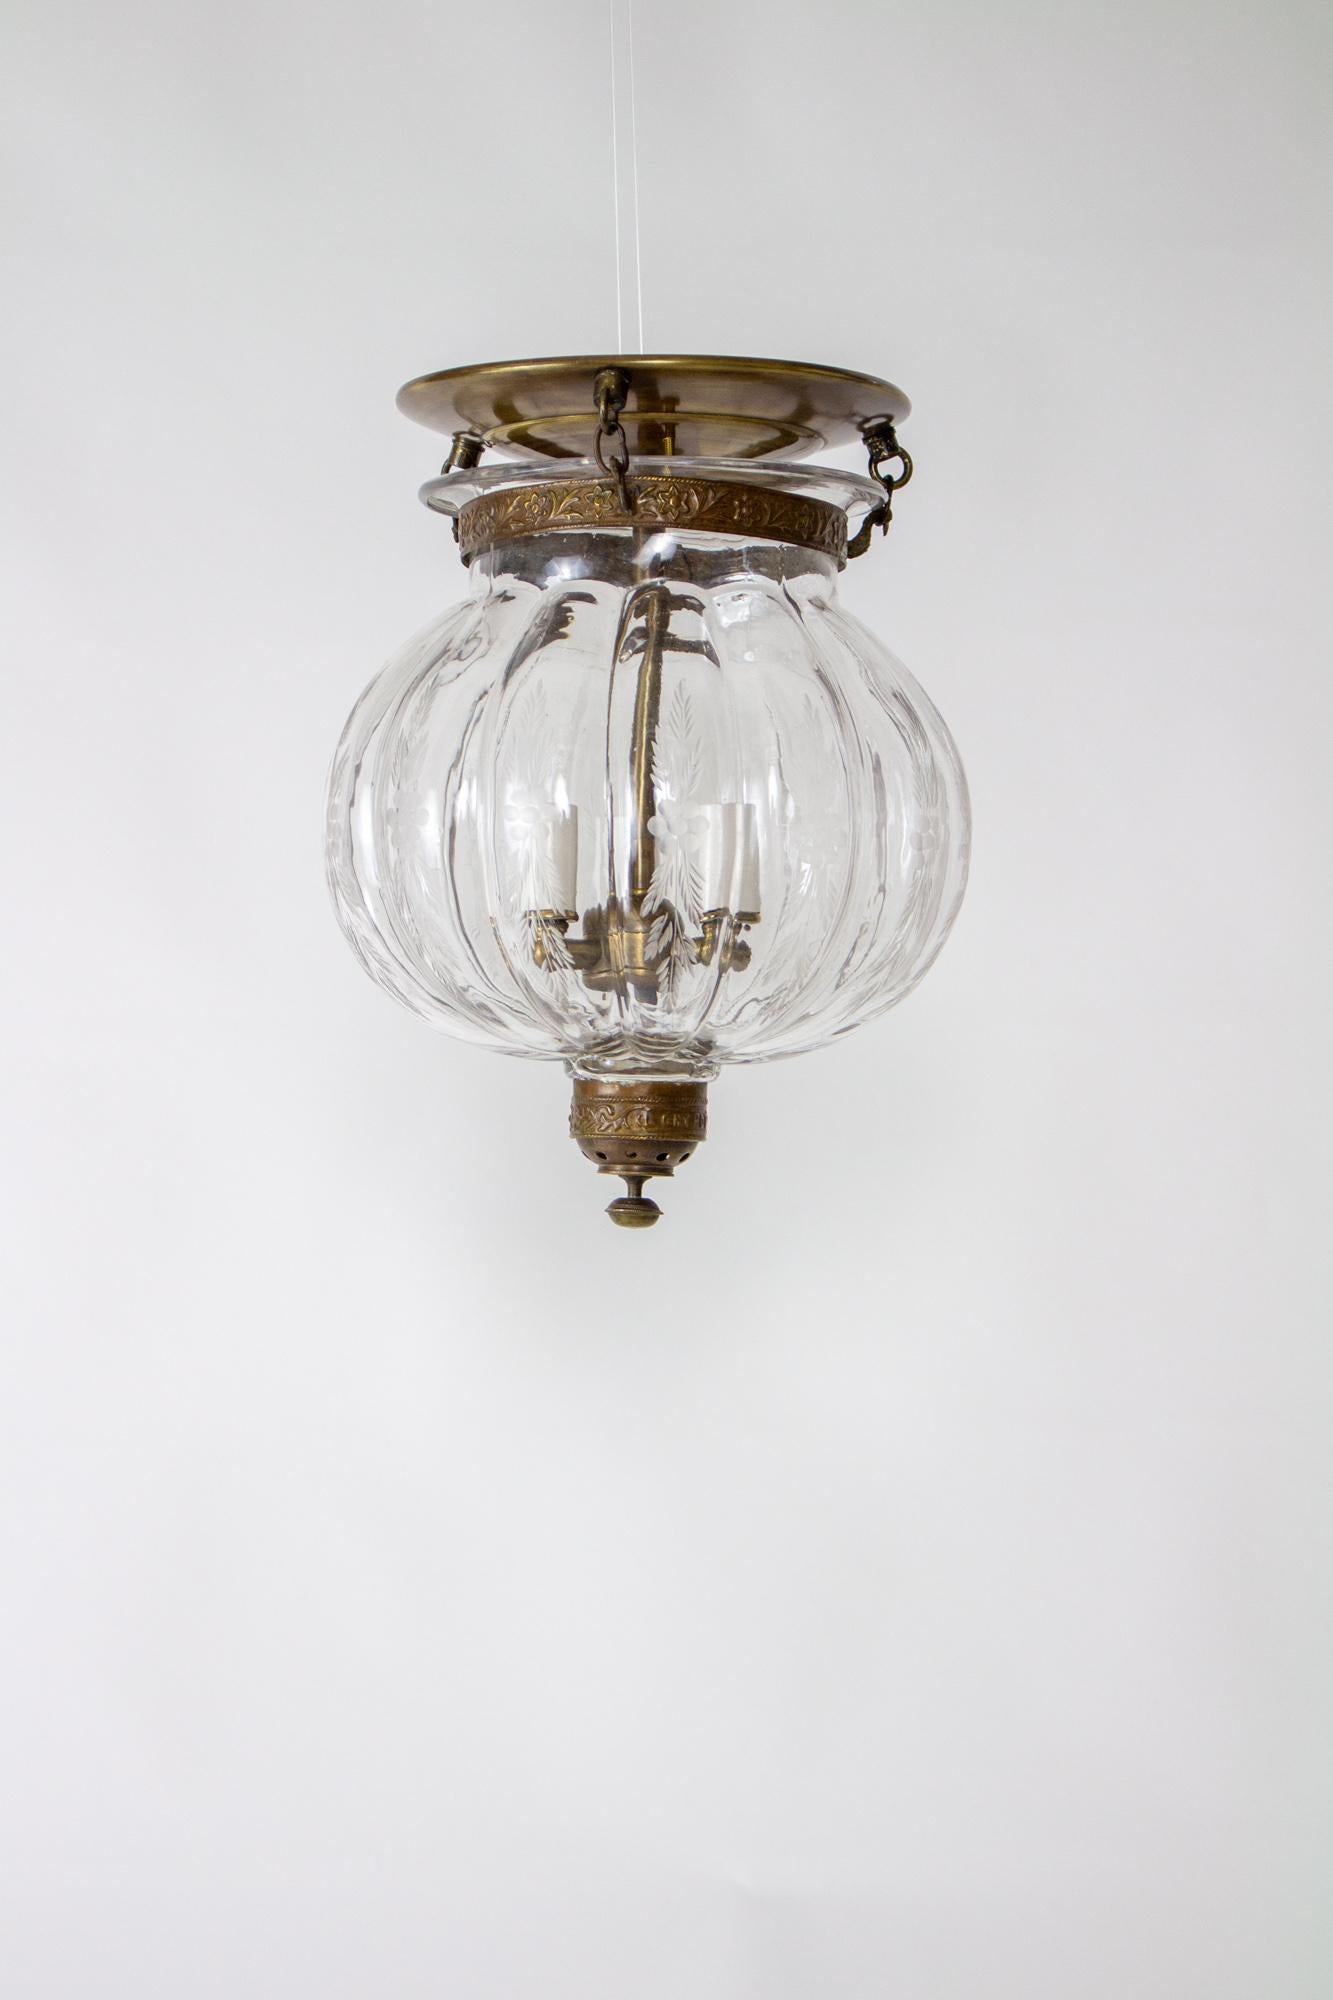 Bell jar lanterns first reached popularity in colonial India and due to their lingering popularity, production has continued to the present. Made from delicately blown clear glass with an engraved wheat pattern. The Glass is suspended by three